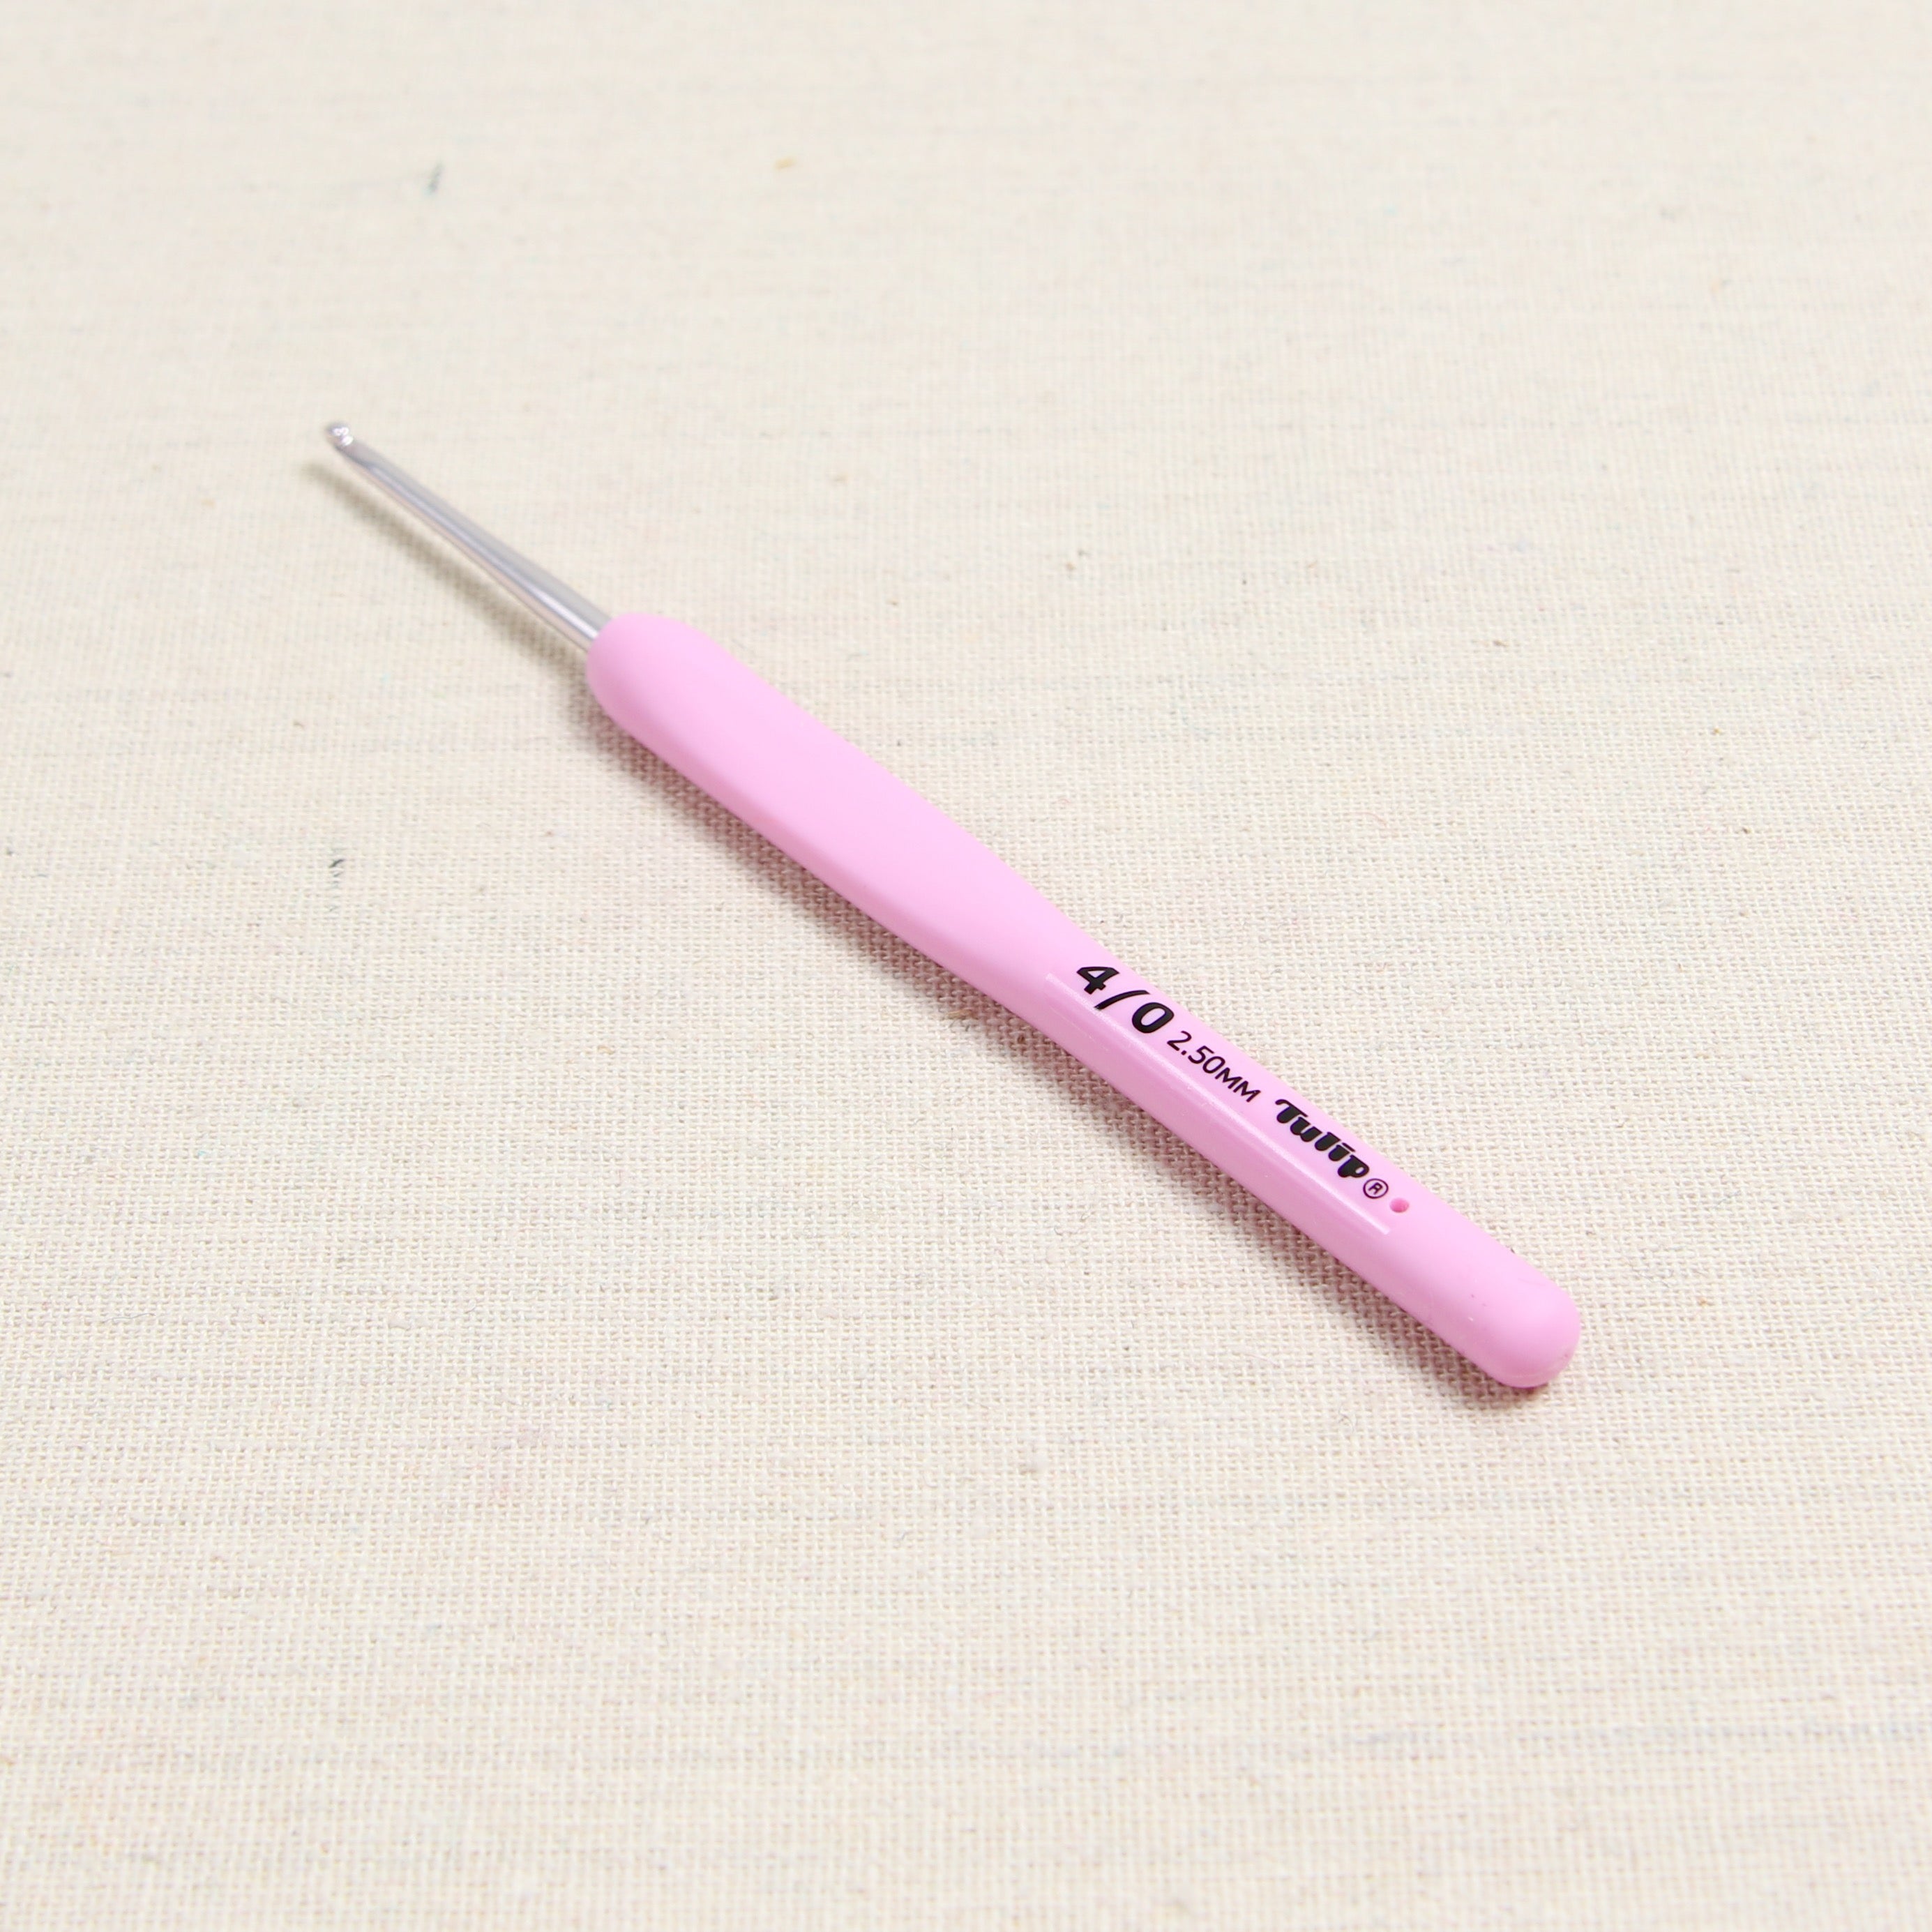 Product Review: Tulip; Etimo Crochet Hook